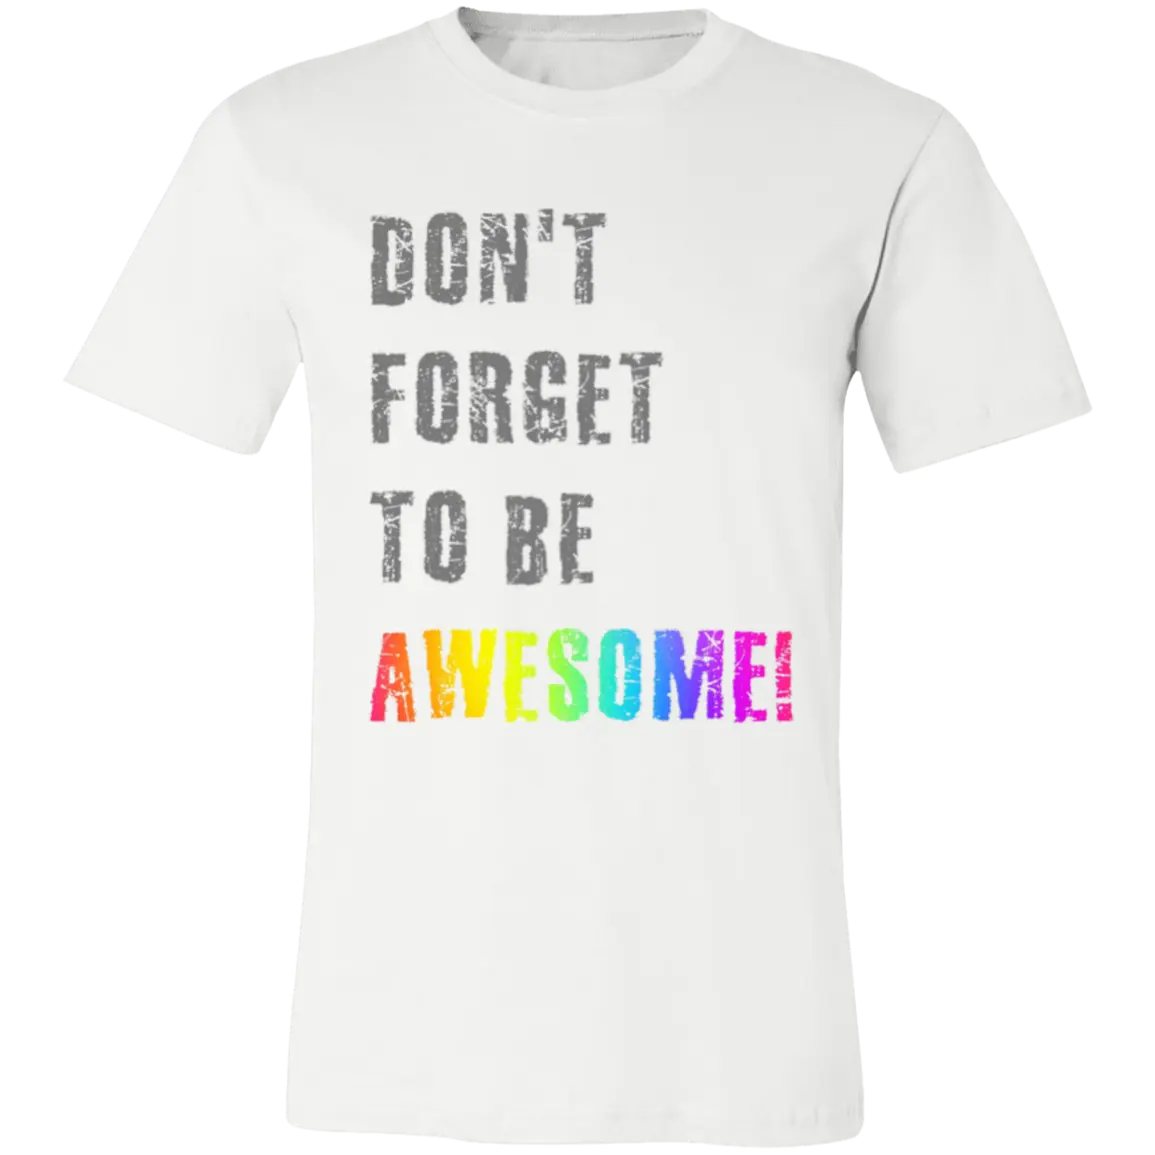 Don't Forget To Be AWESOME! Jersey Short-Sleeve T-Shirt - T-Shirts White / M Real Domain Streetwear Real Domain Streetwear